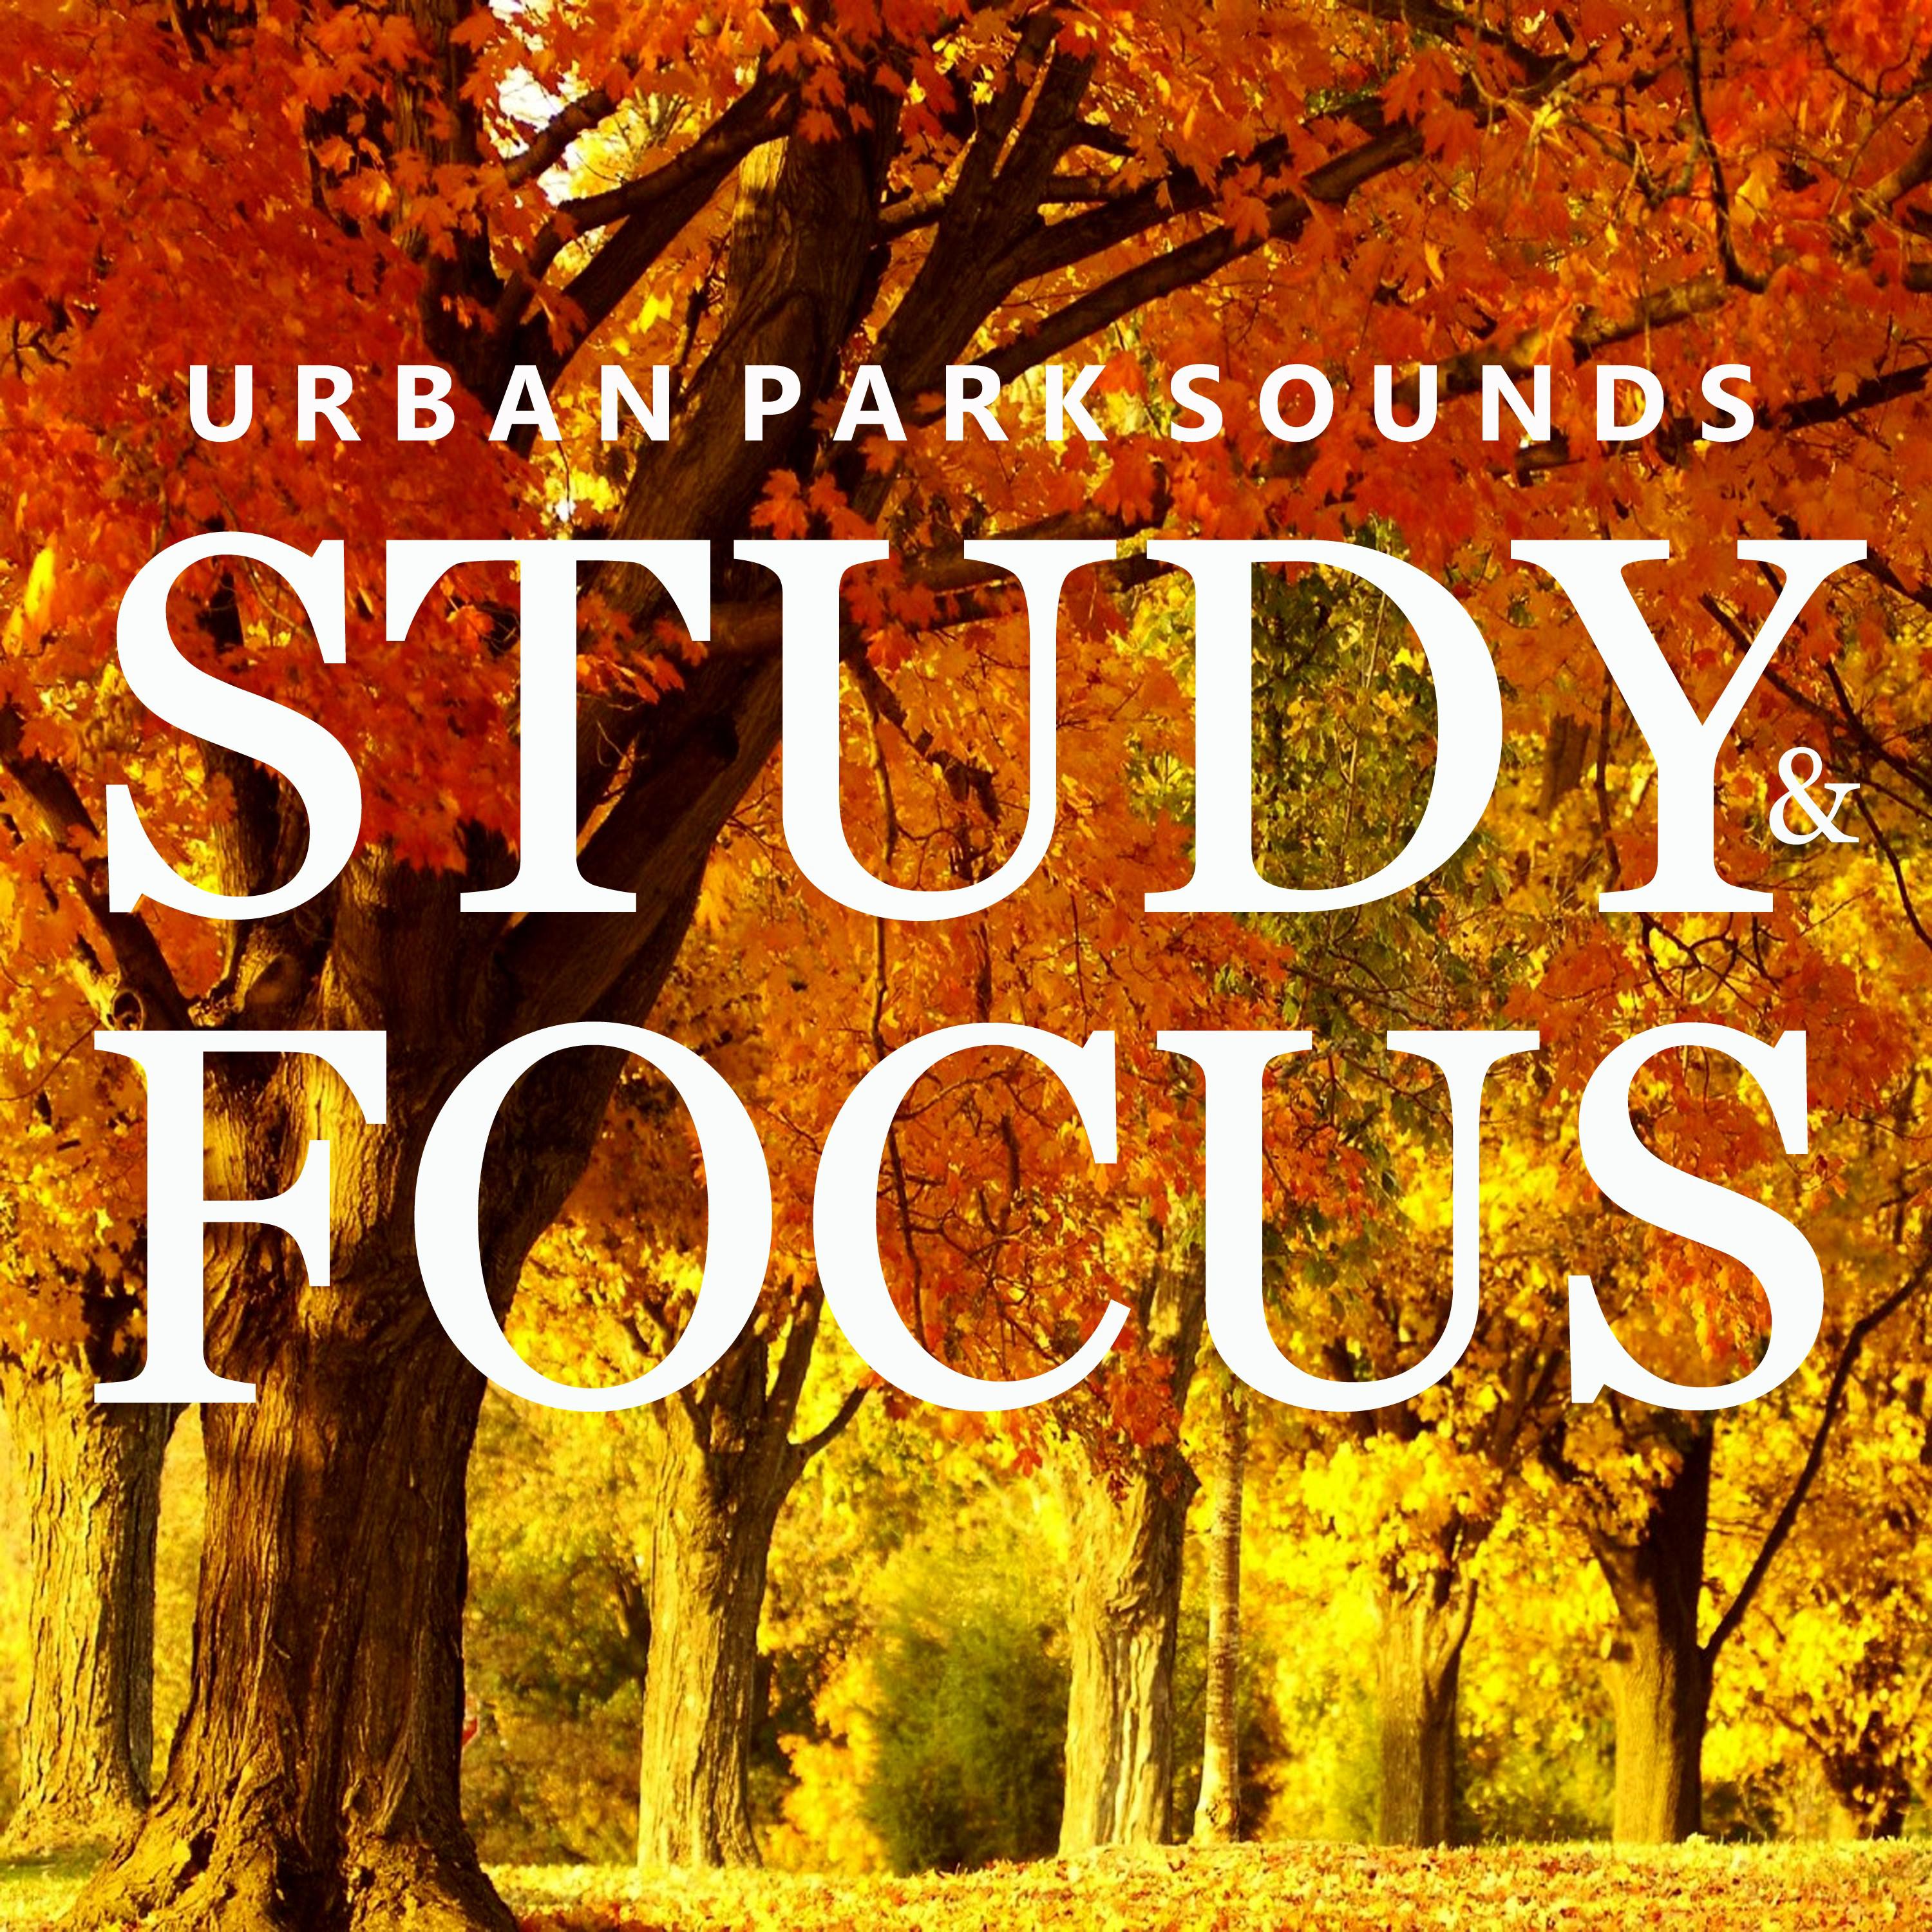 Urban Park Sounds for Studying, Pt. 49